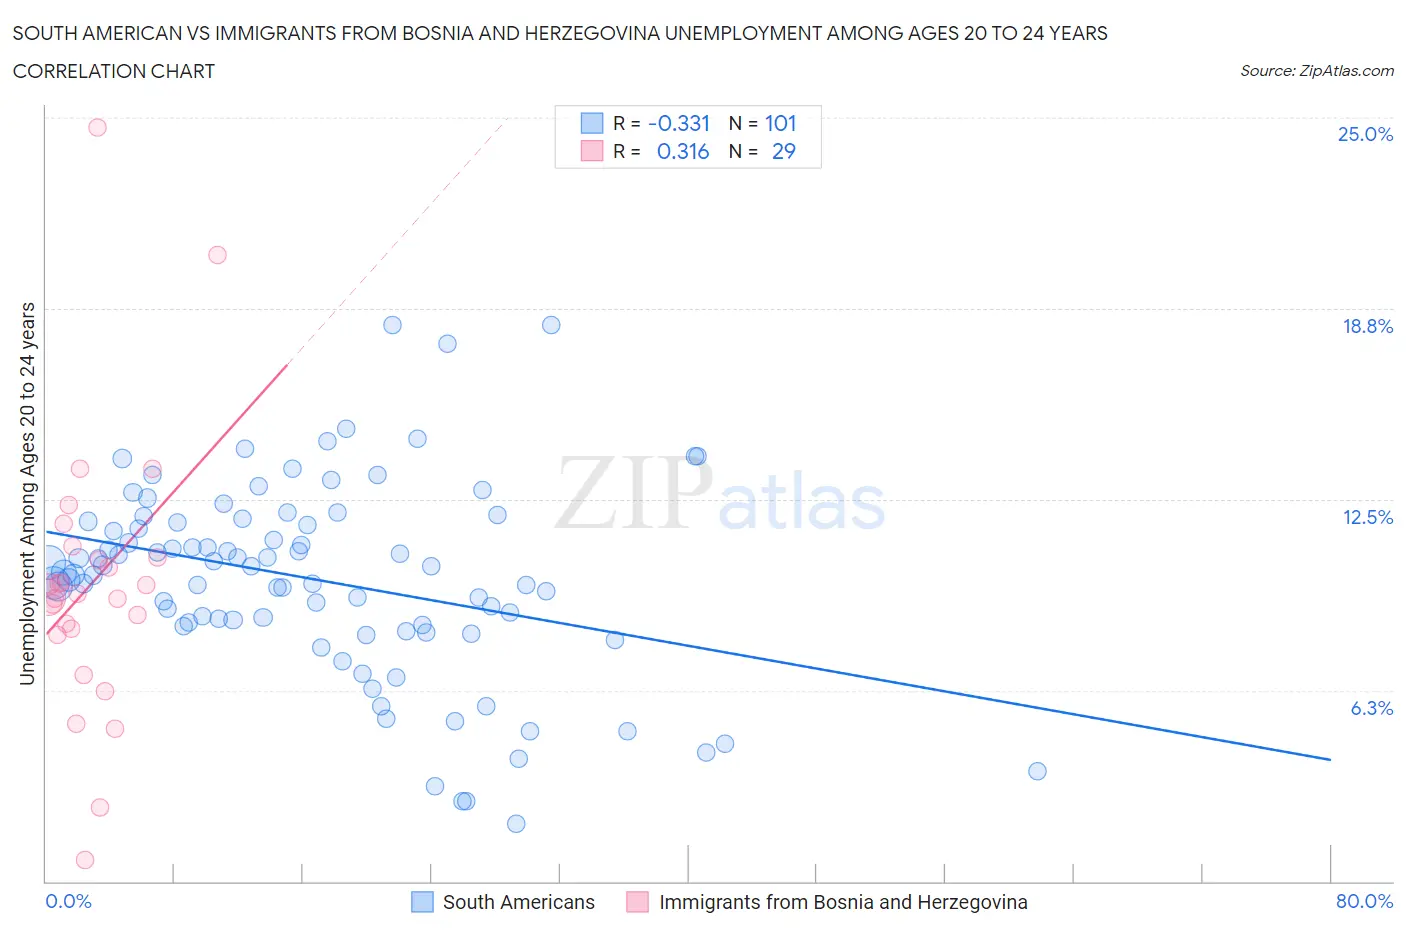 South American vs Immigrants from Bosnia and Herzegovina Unemployment Among Ages 20 to 24 years